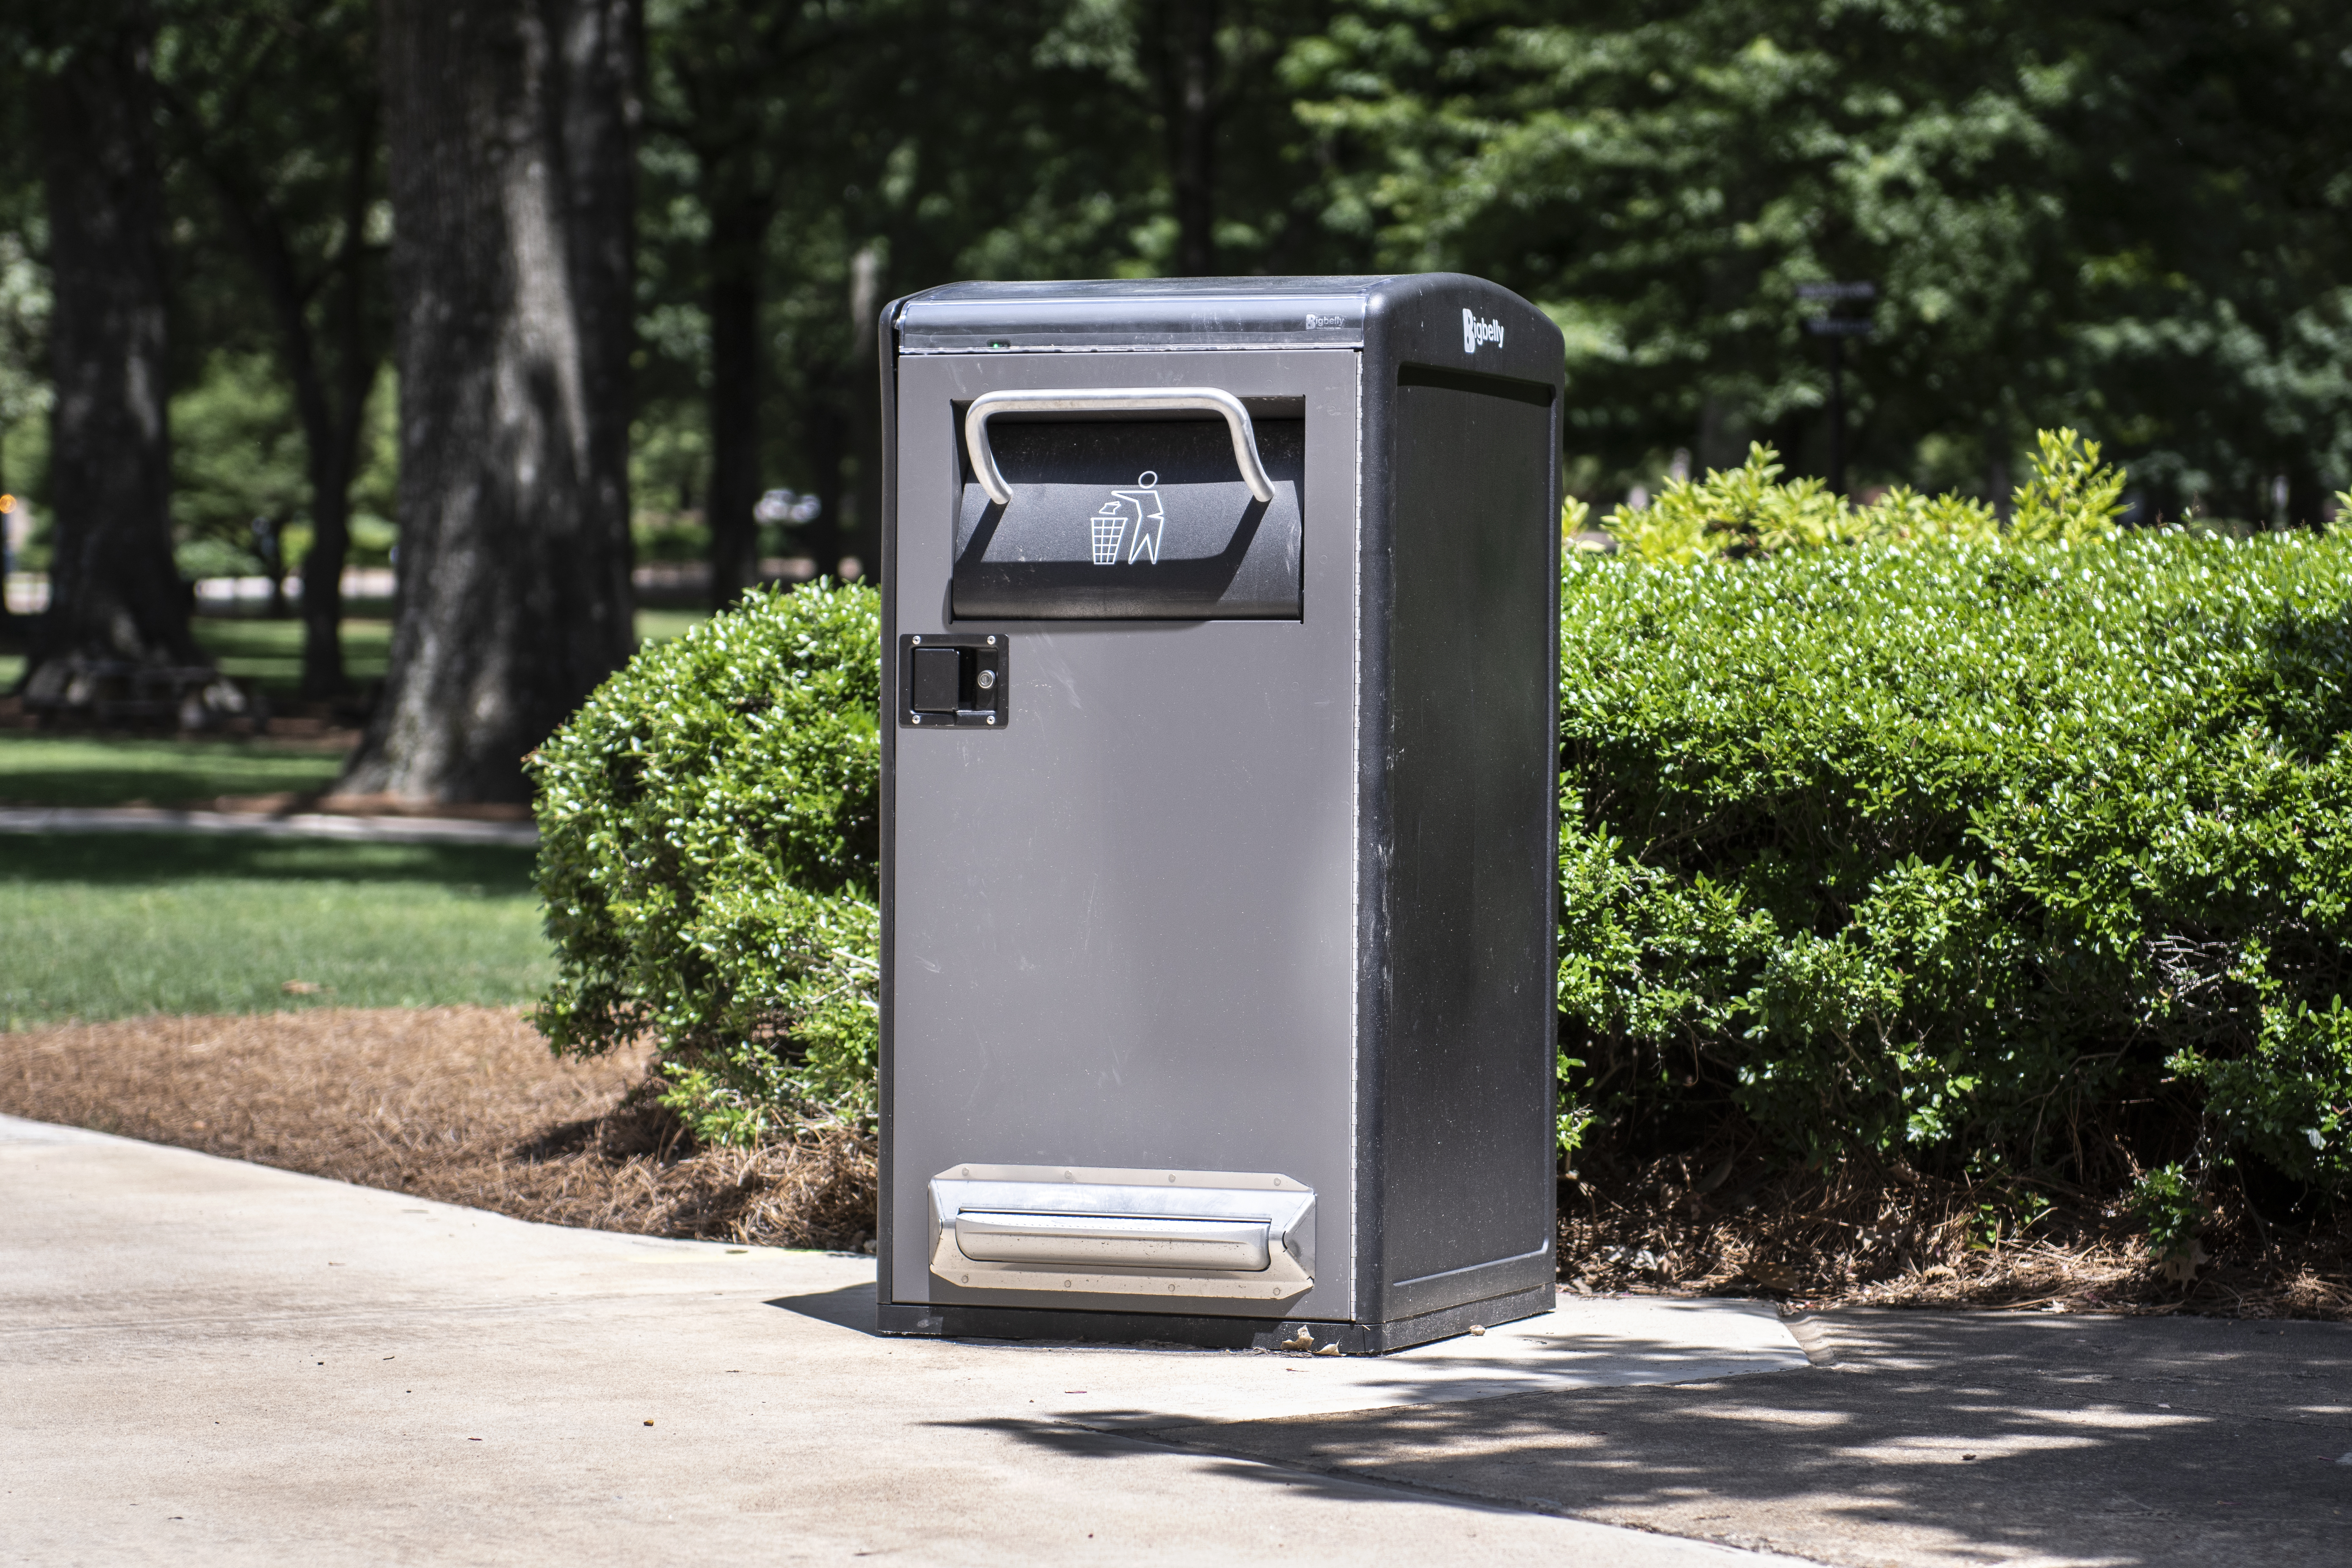 A look at UM's new $4,500 trash cans - The Daily Mississippian